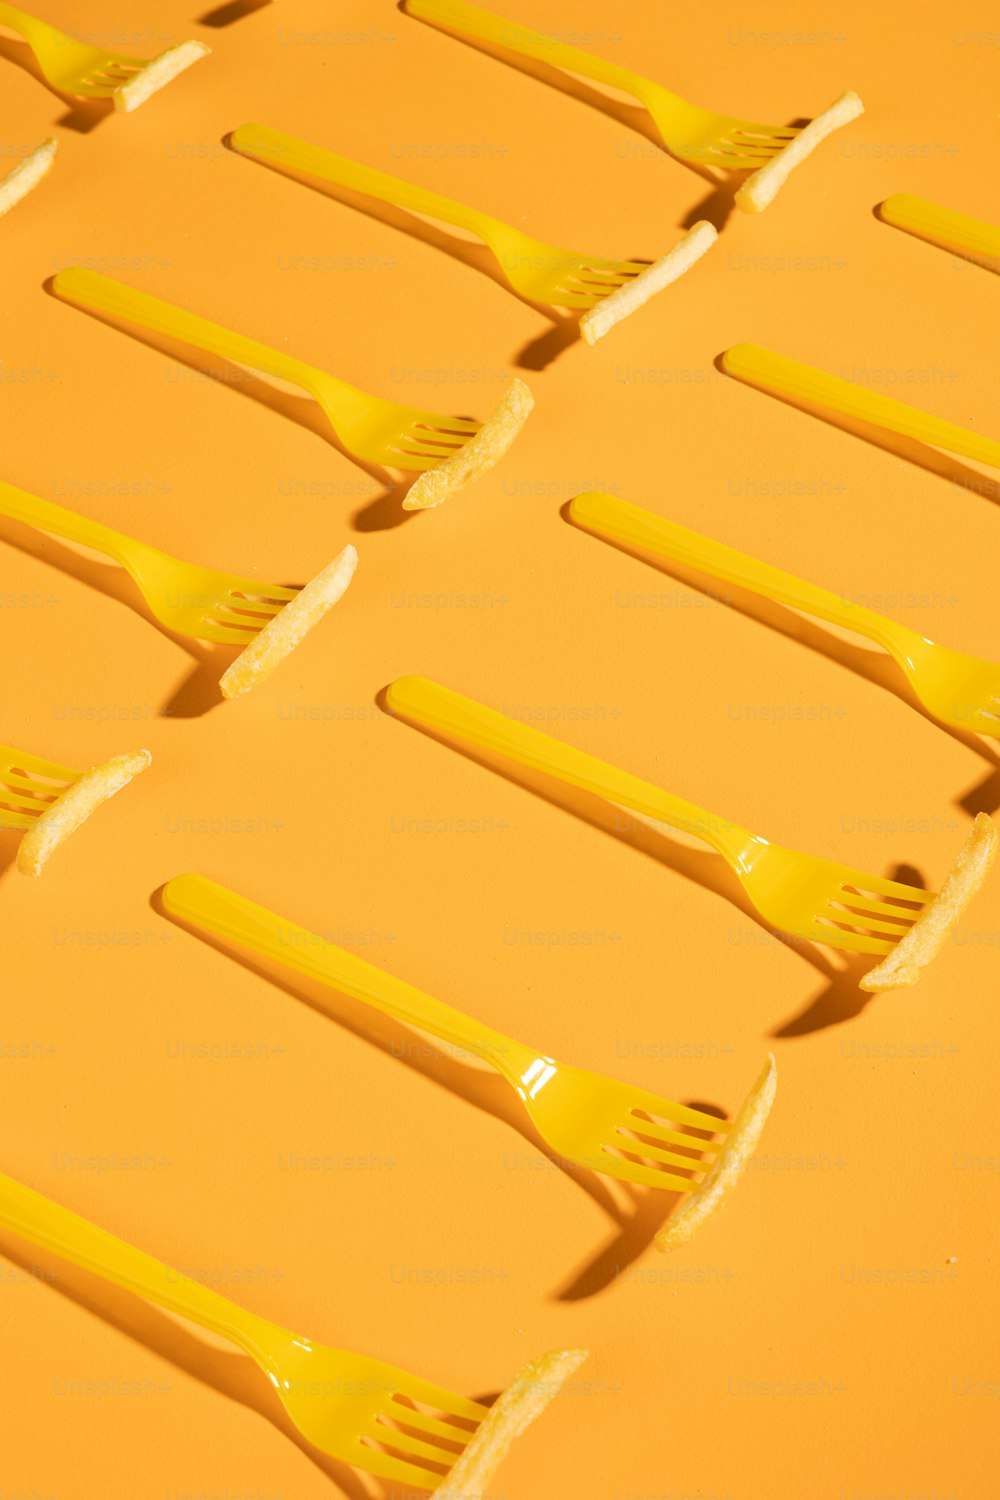 a group of yellow toothbrushes sitting on top of each other